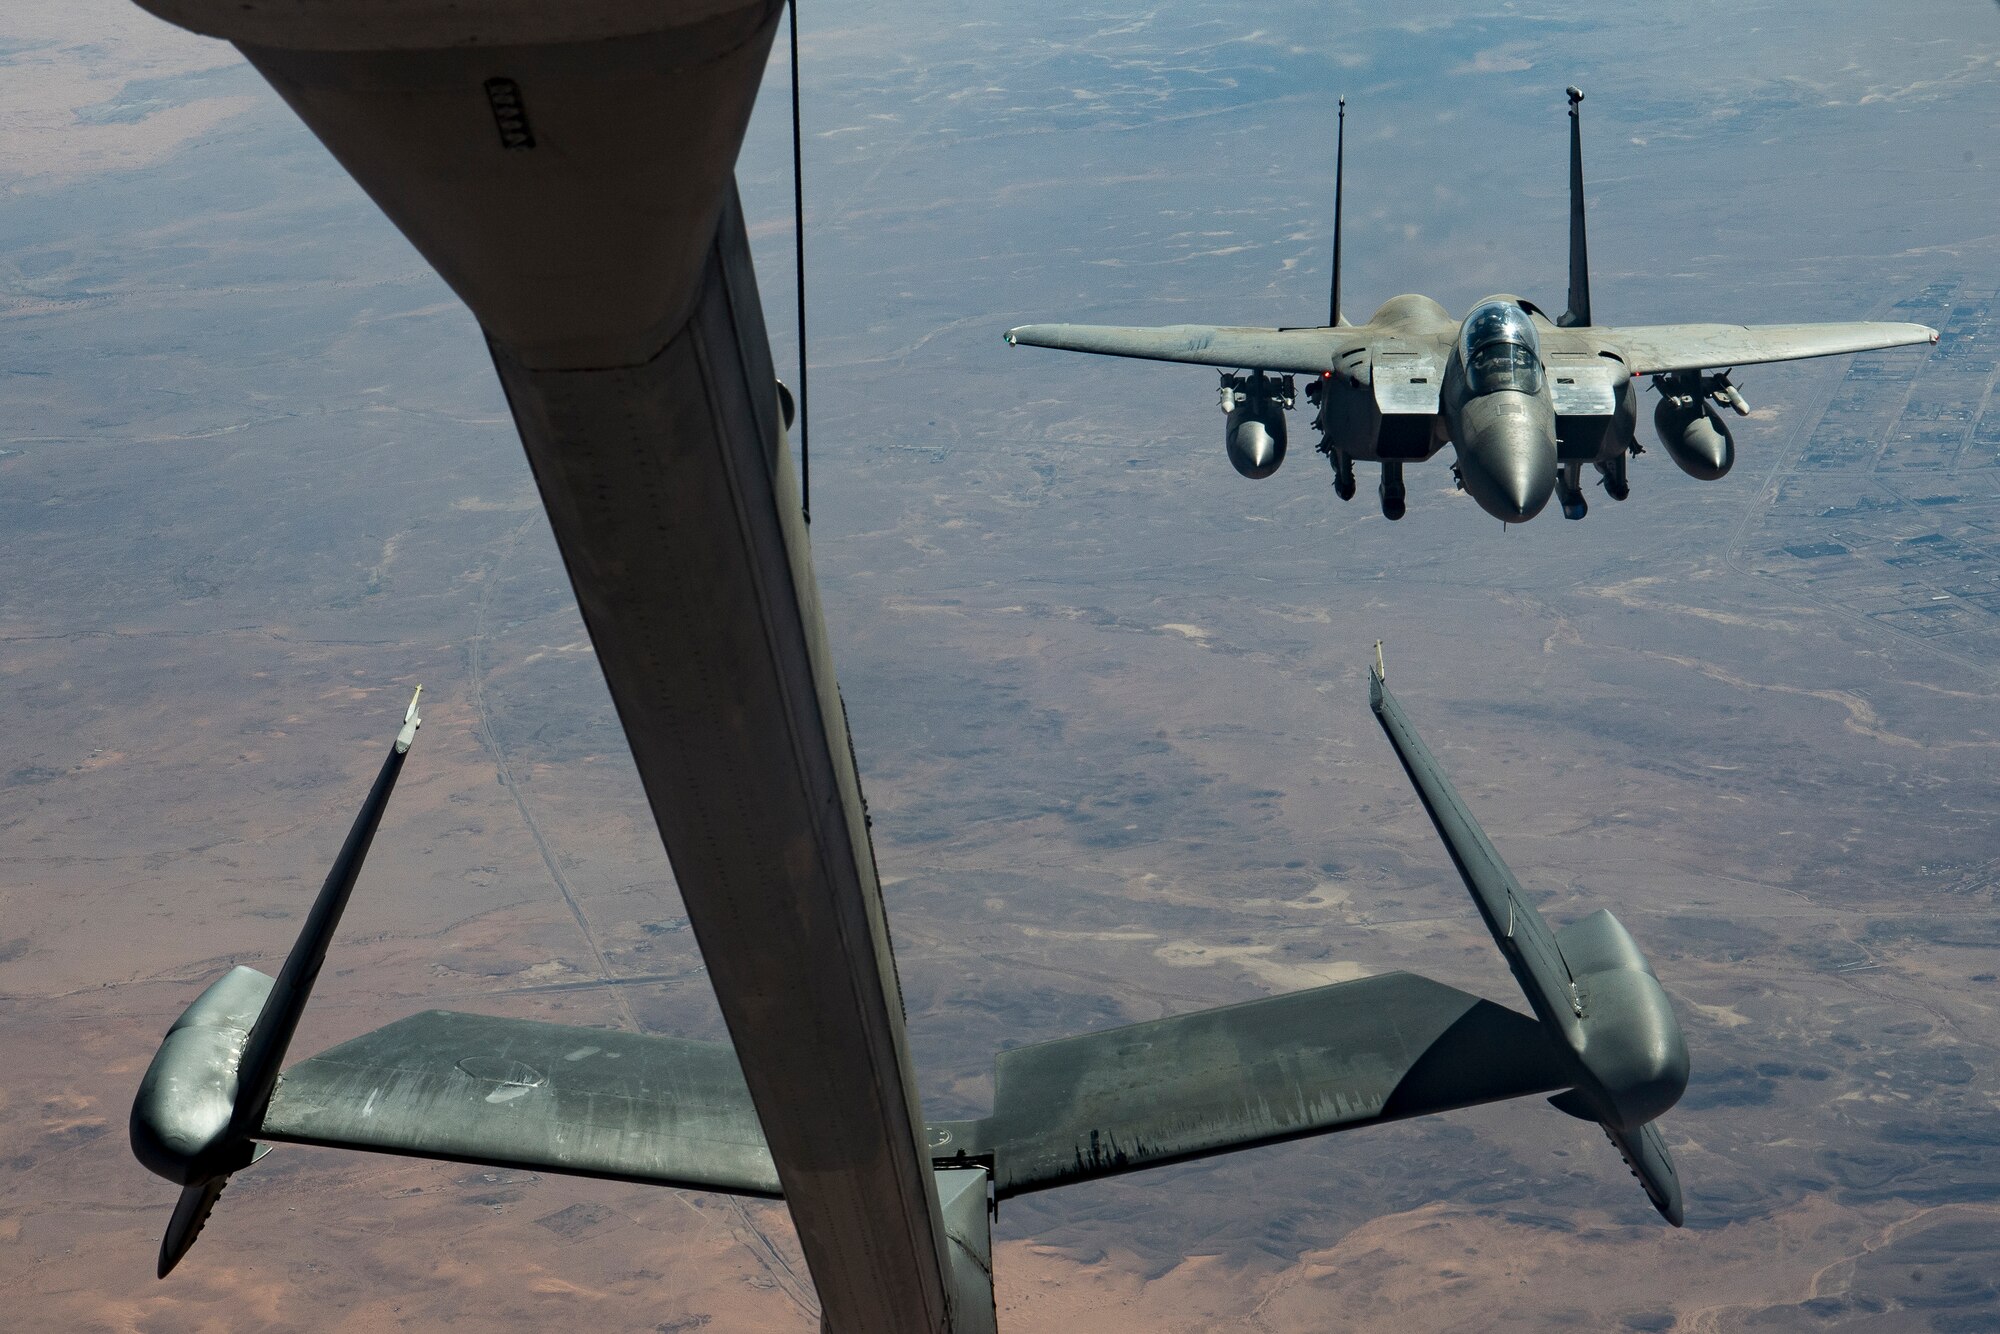 A U.S. Air Force F-15E Strike Eagle assigned to the 494th Expeditionary Fighter Squadron approaches a KC-10 Extender assigned to the 908th Expeditionary Air Refueling Squadron above the U.S. Central Command area of responsibility, Jan. 13, 2020.